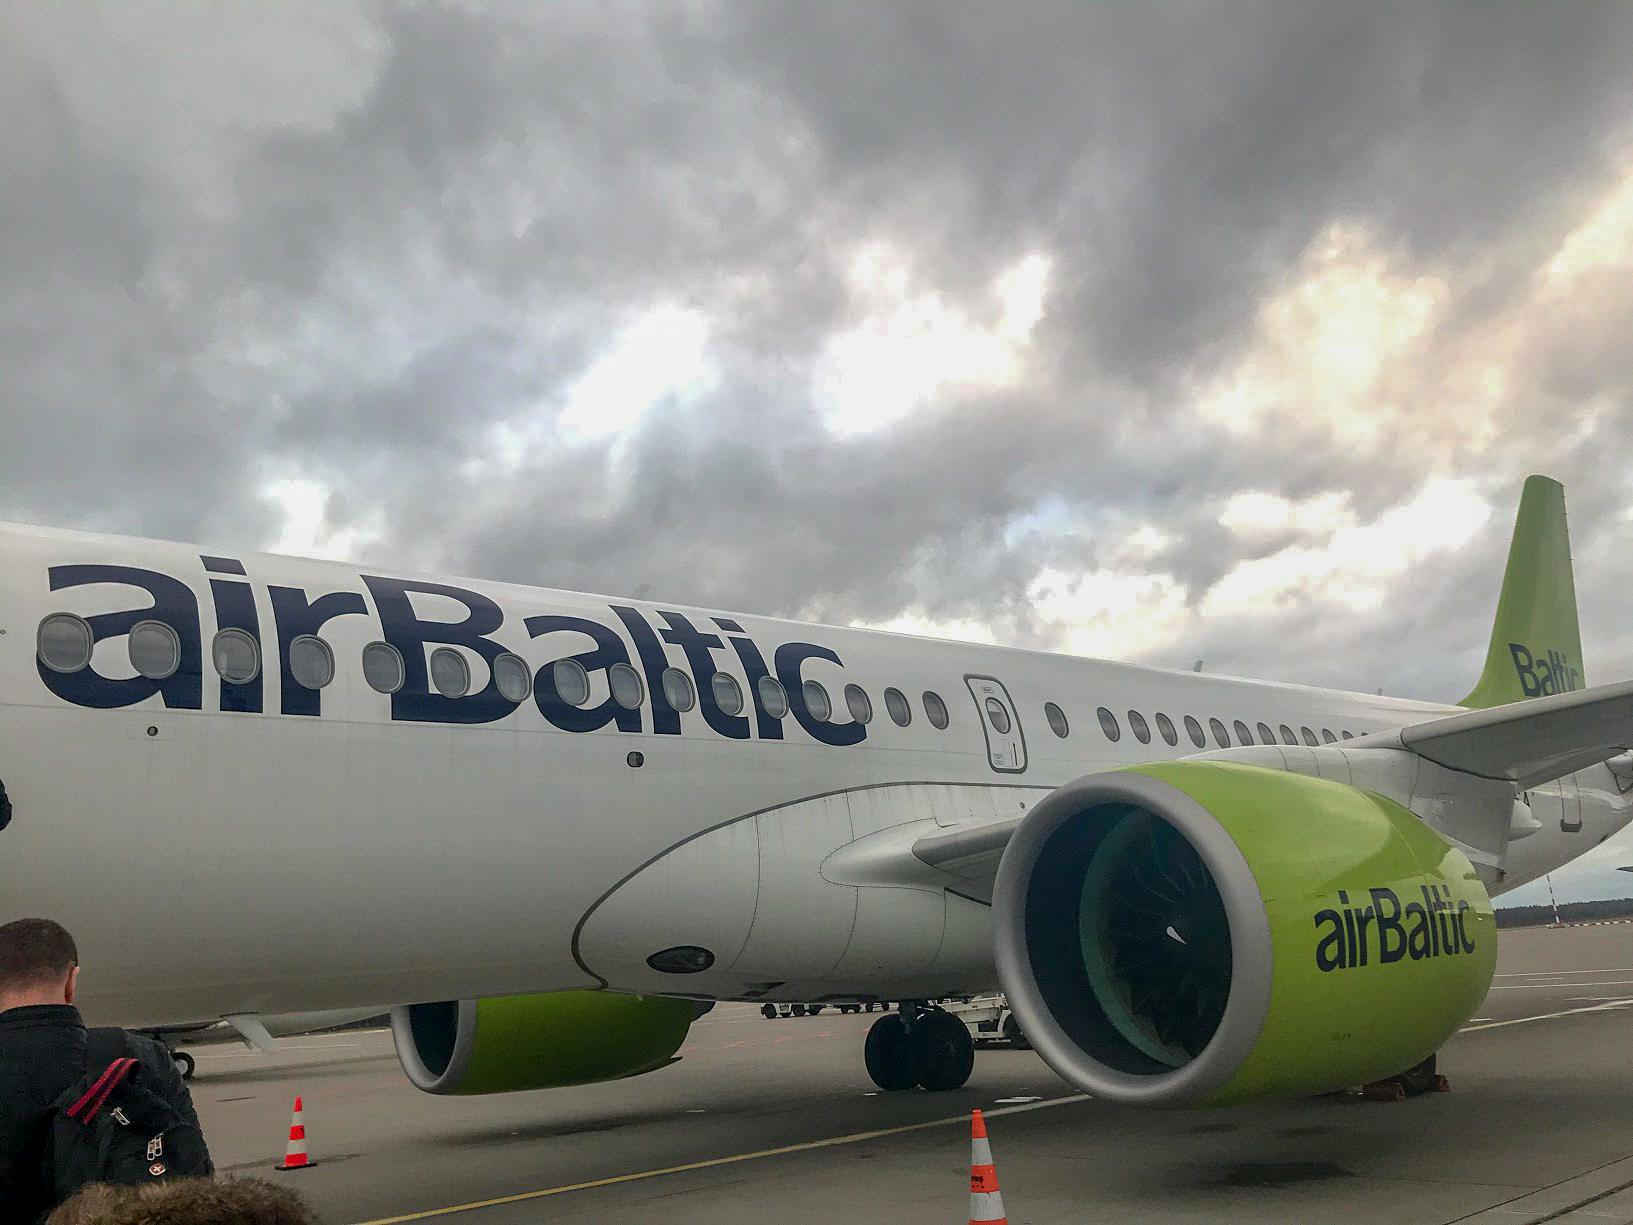 airBaltic Airbus A220-300 plane on stand